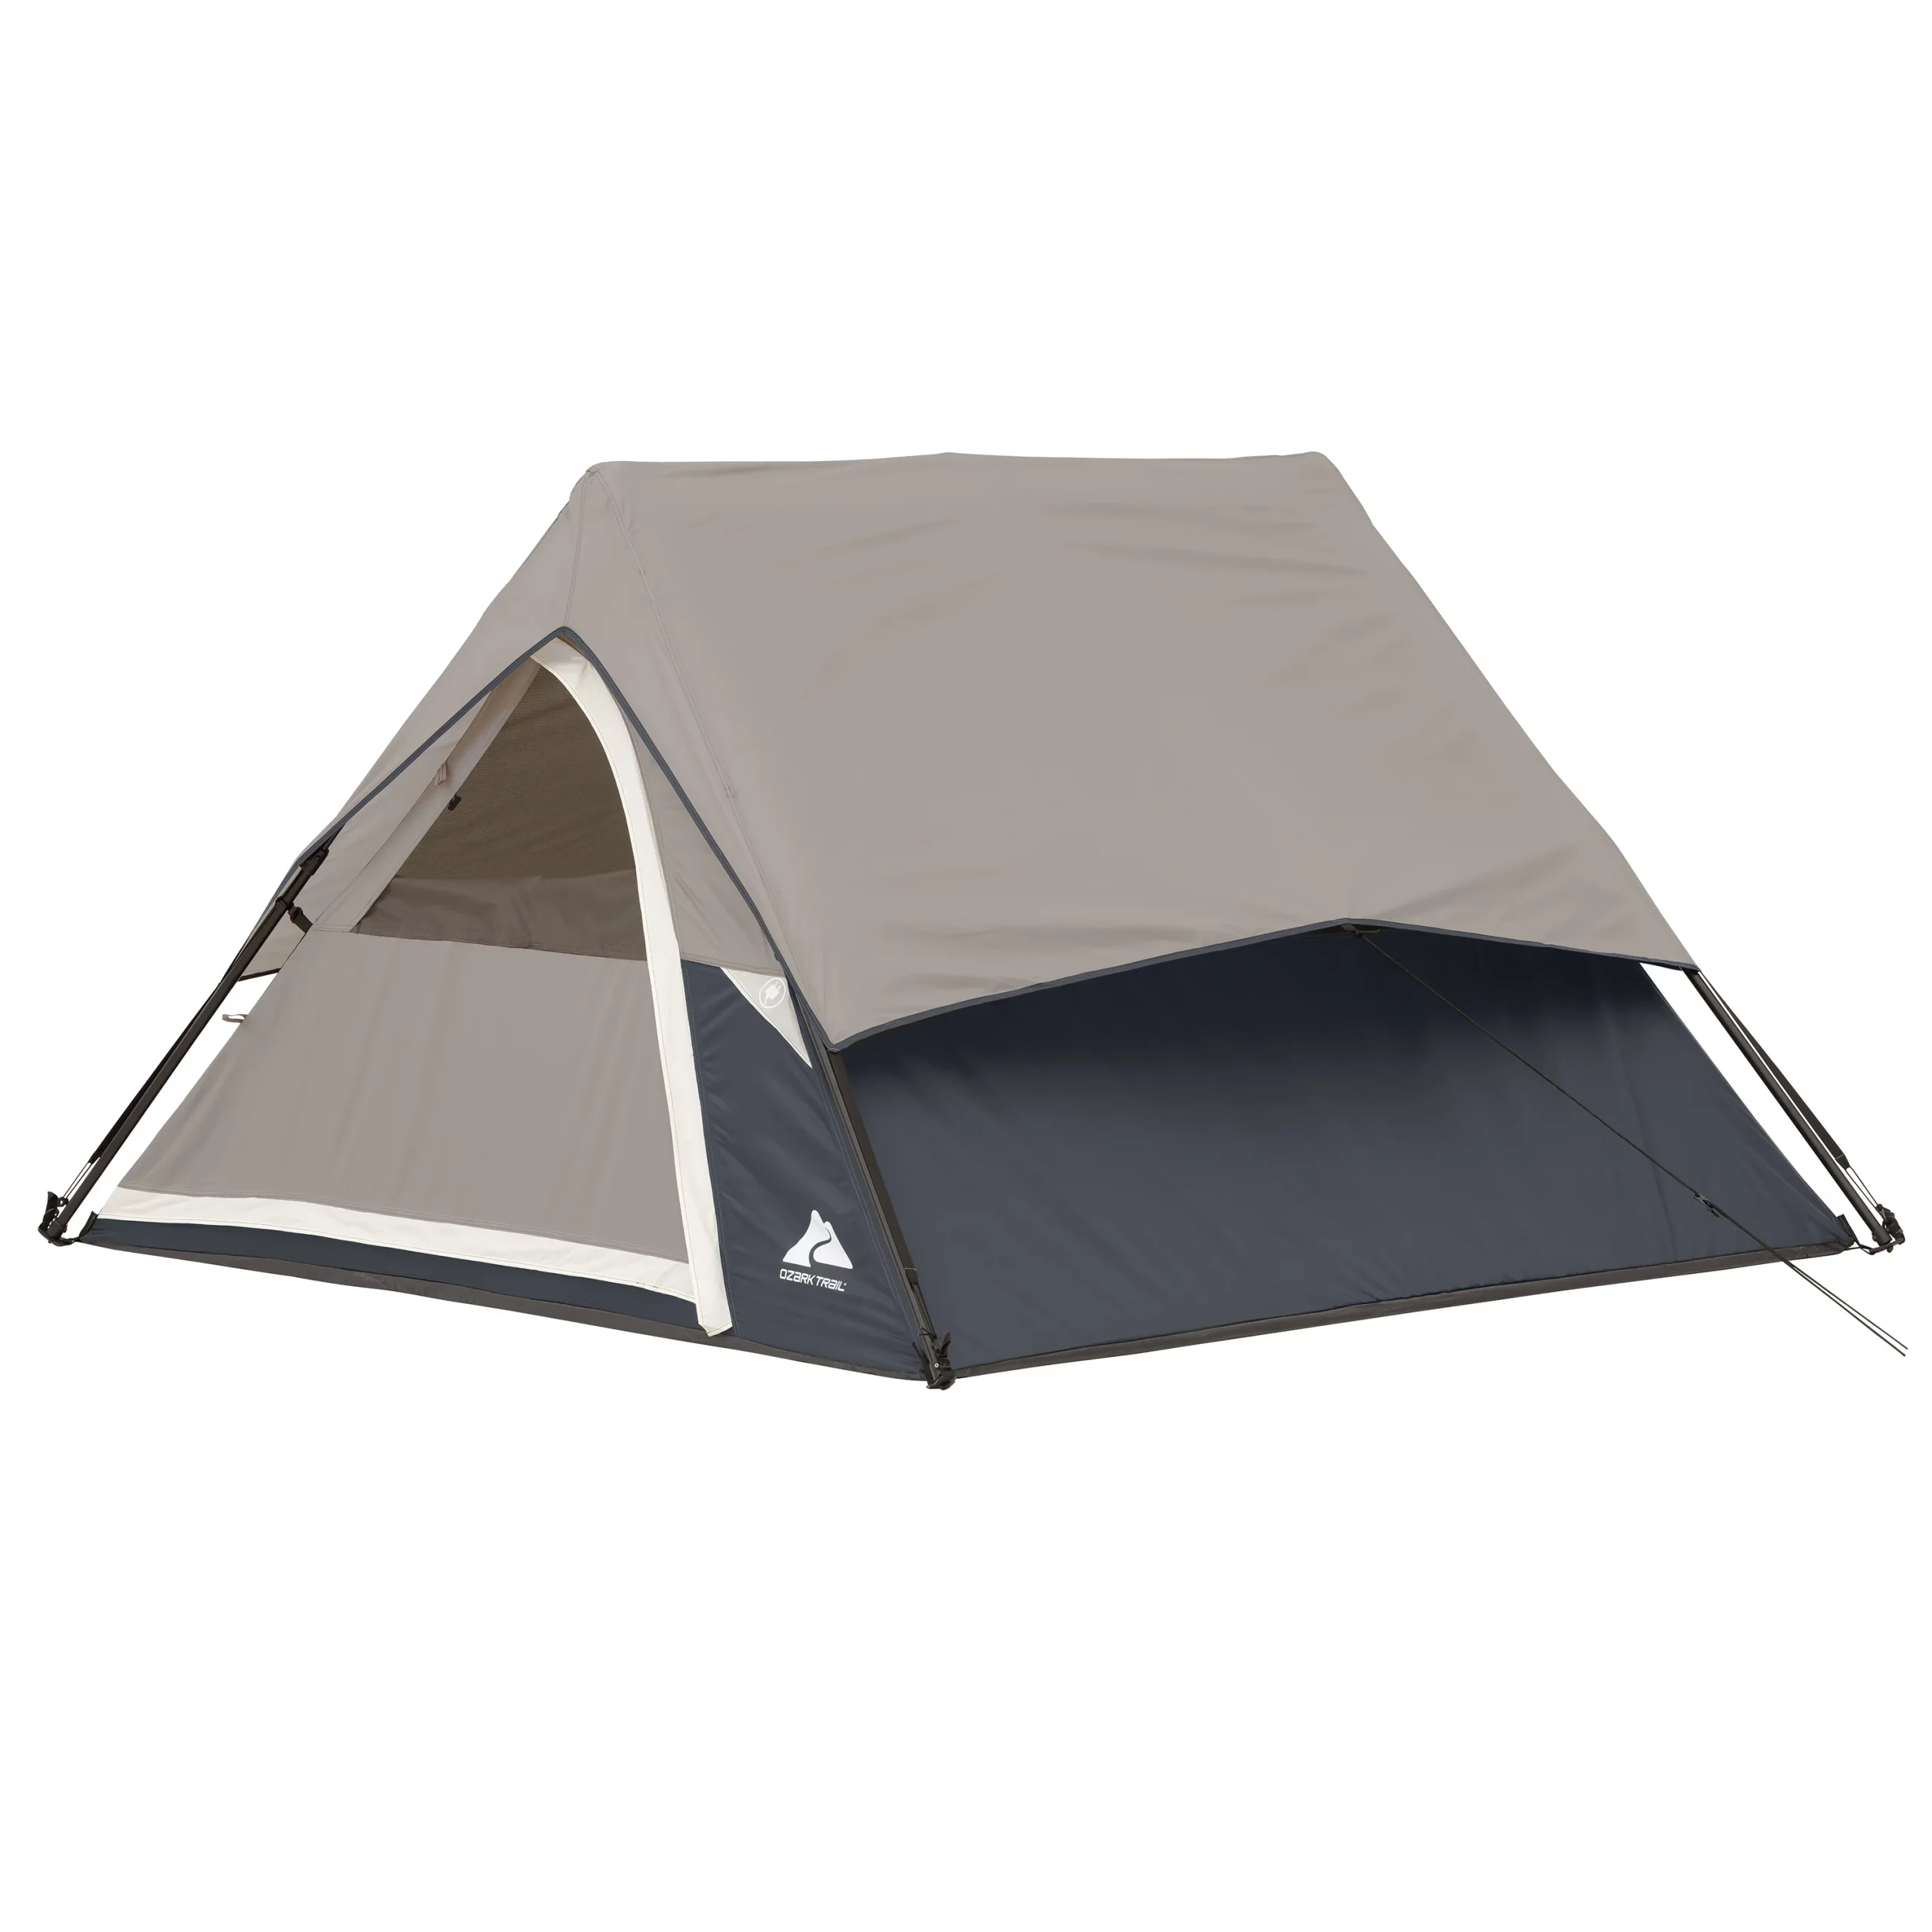 Ozark Trail 3 Person Dome Tent: Quick and Easy Assembling for Outdoor Fun Times